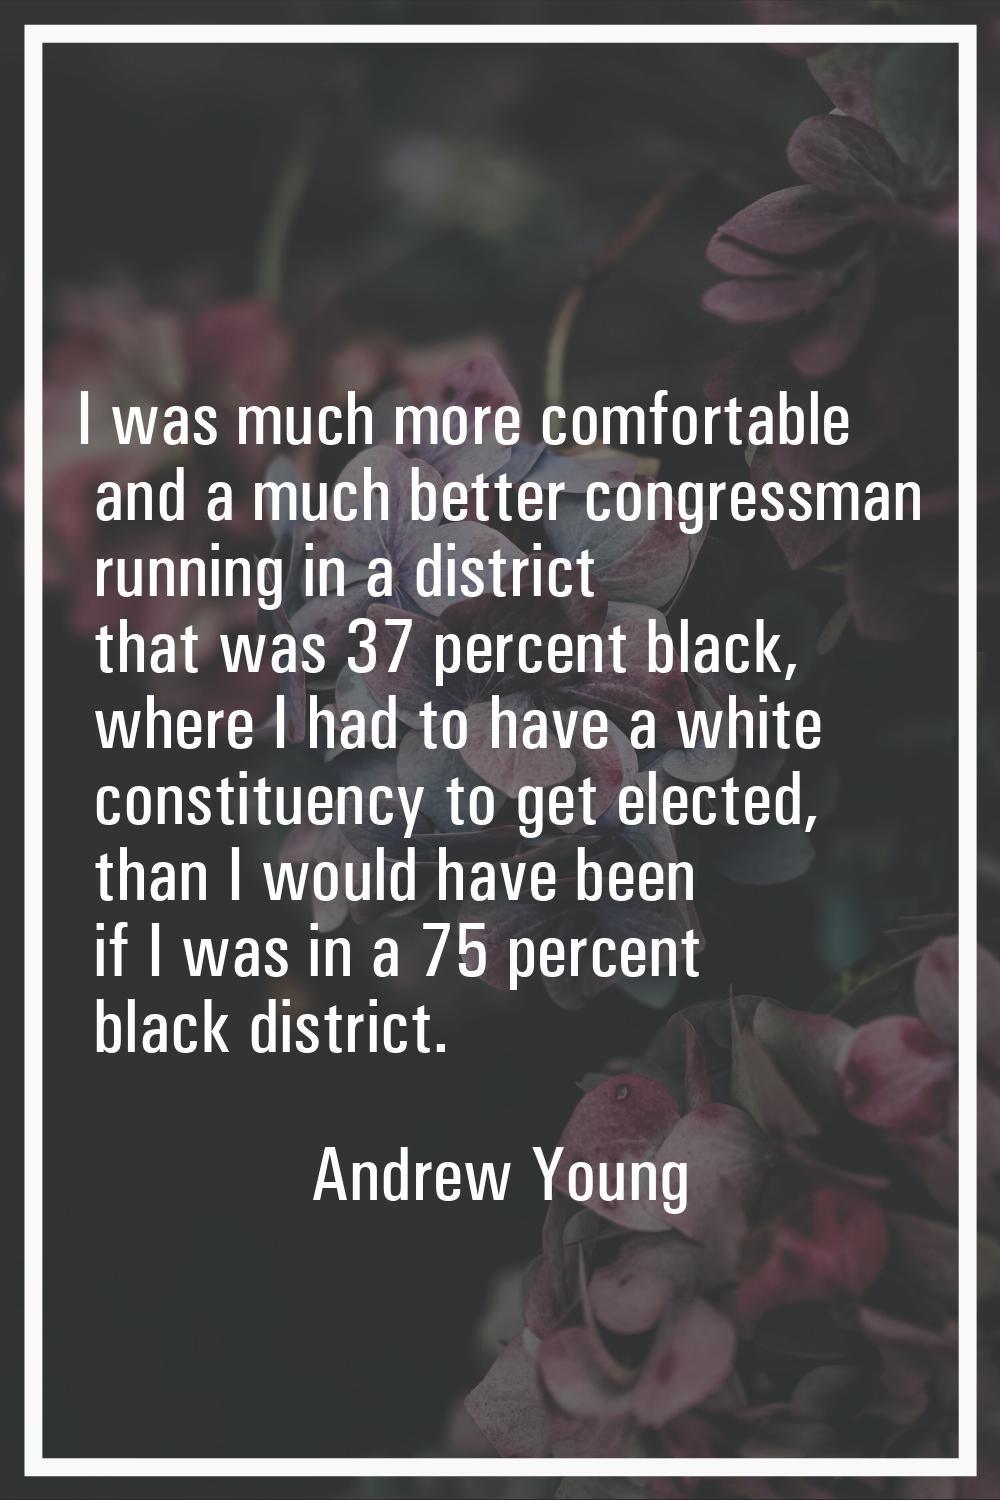 I was much more comfortable and a much better congressman running in a district that was 37 percent